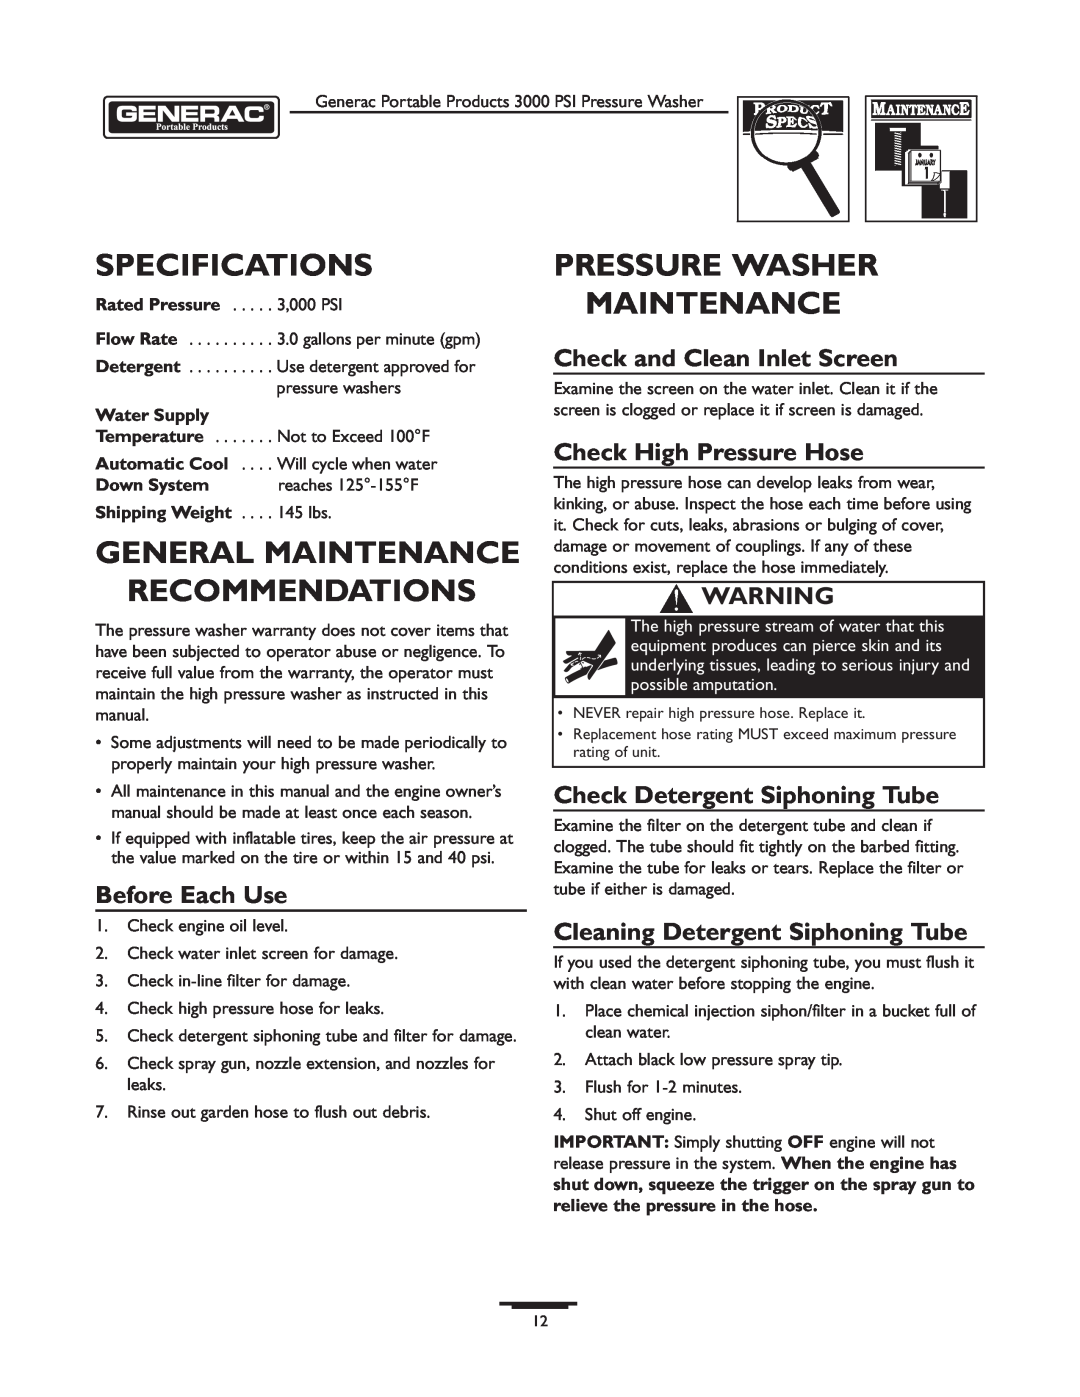 Briggs & Stratton 1418-2 Specifications, General Maintenance, Pressure Washer Maintenance, Recommendations, Water Supply 